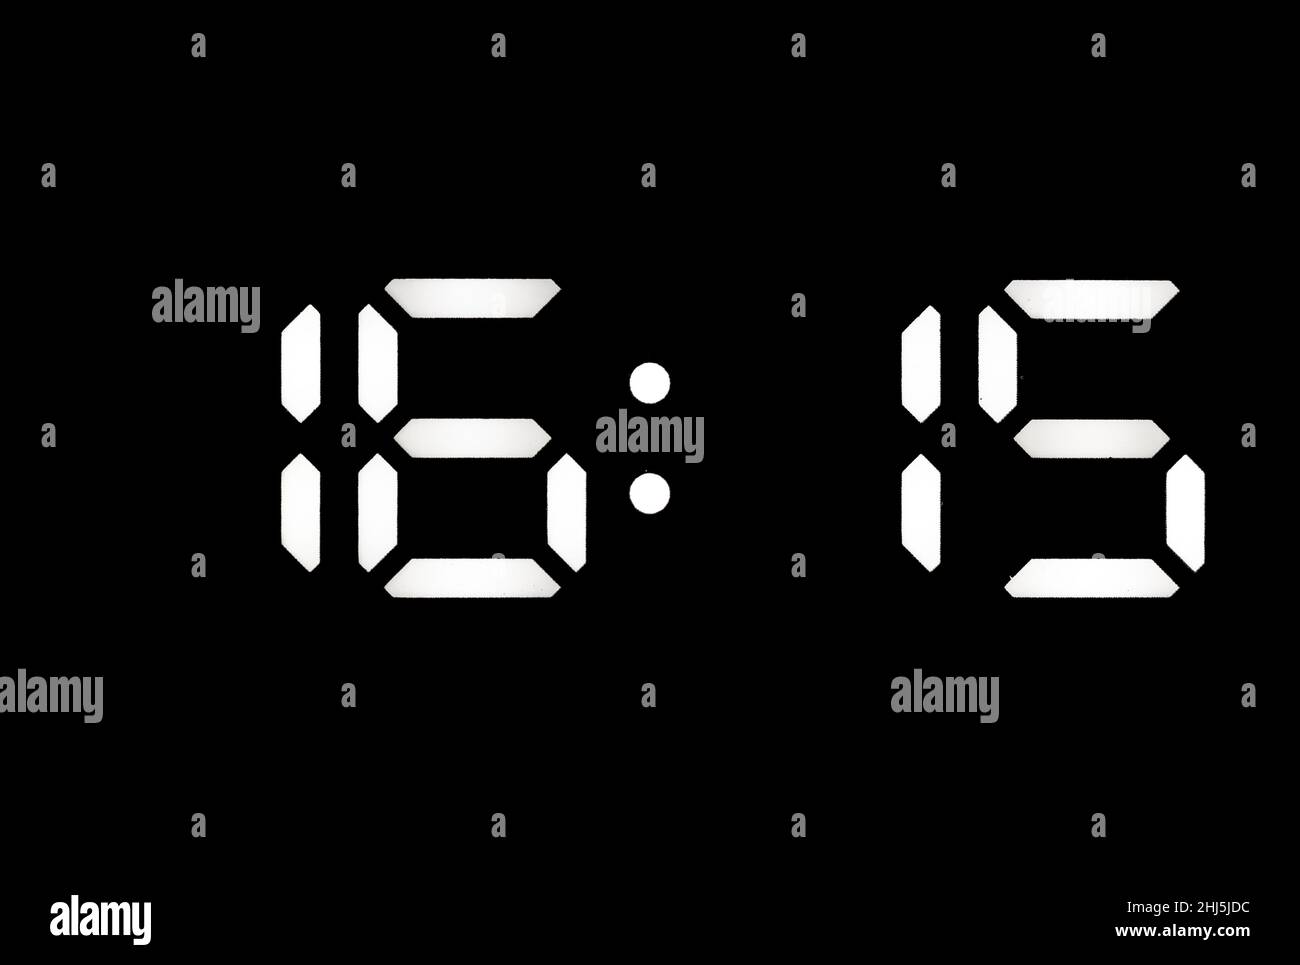 Real white led digital clock on a black background showing time 16:15 Stock Photo